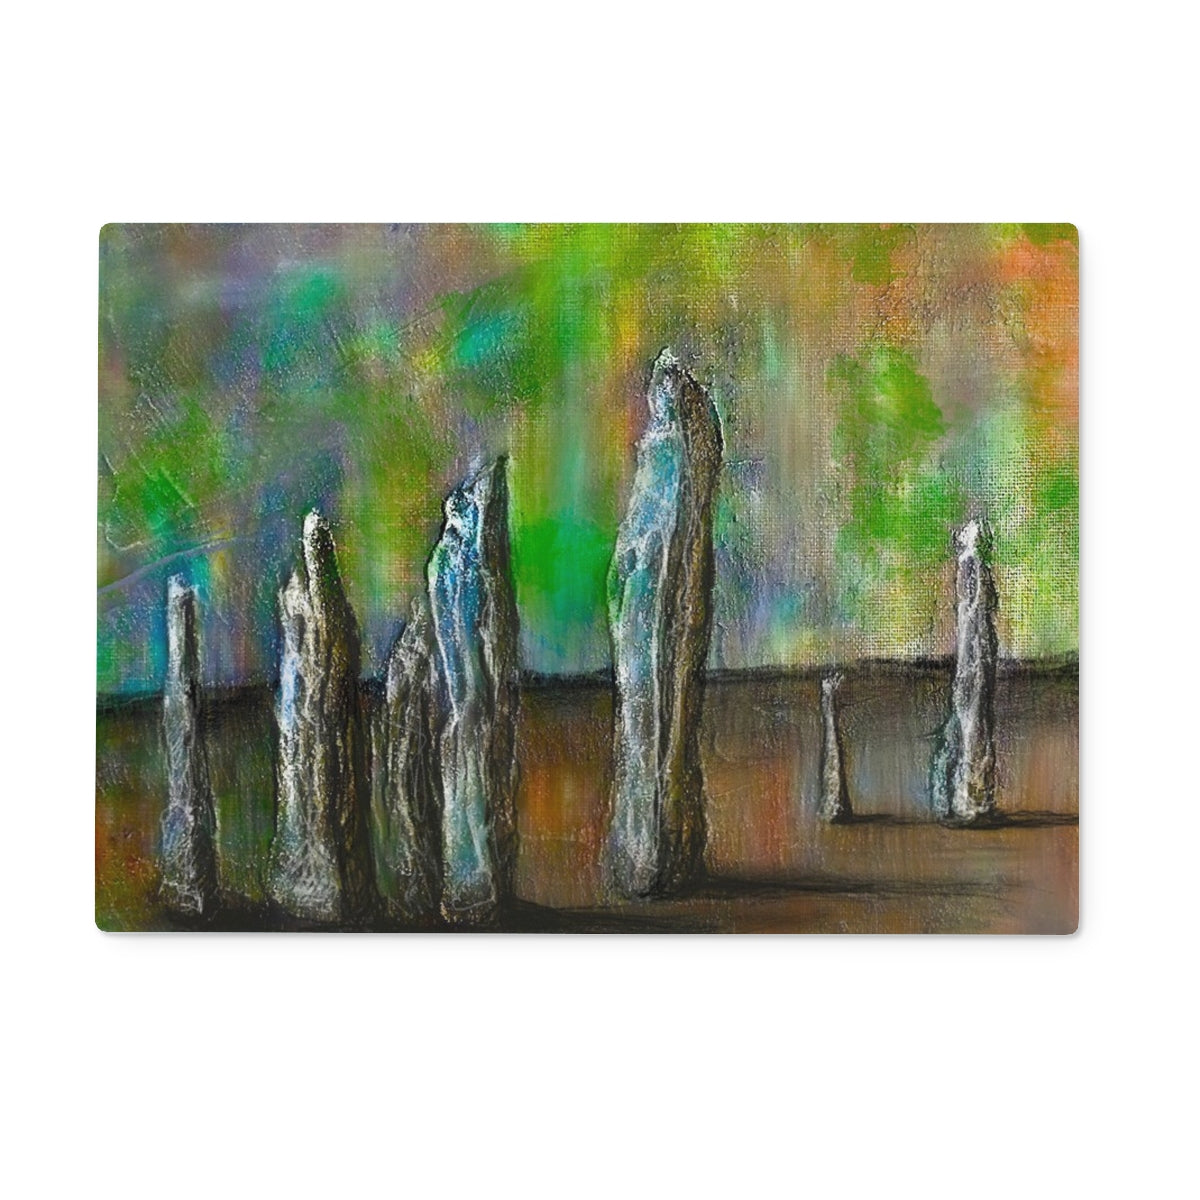 Callanish Northern Lights Art Gifts Glass Chopping Board-Glass Chopping Boards-Hebridean Islands Art Gallery-15"x11" Rectangular-Paintings, Prints, Homeware, Art Gifts From Scotland By Scottish Artist Kevin Hunter